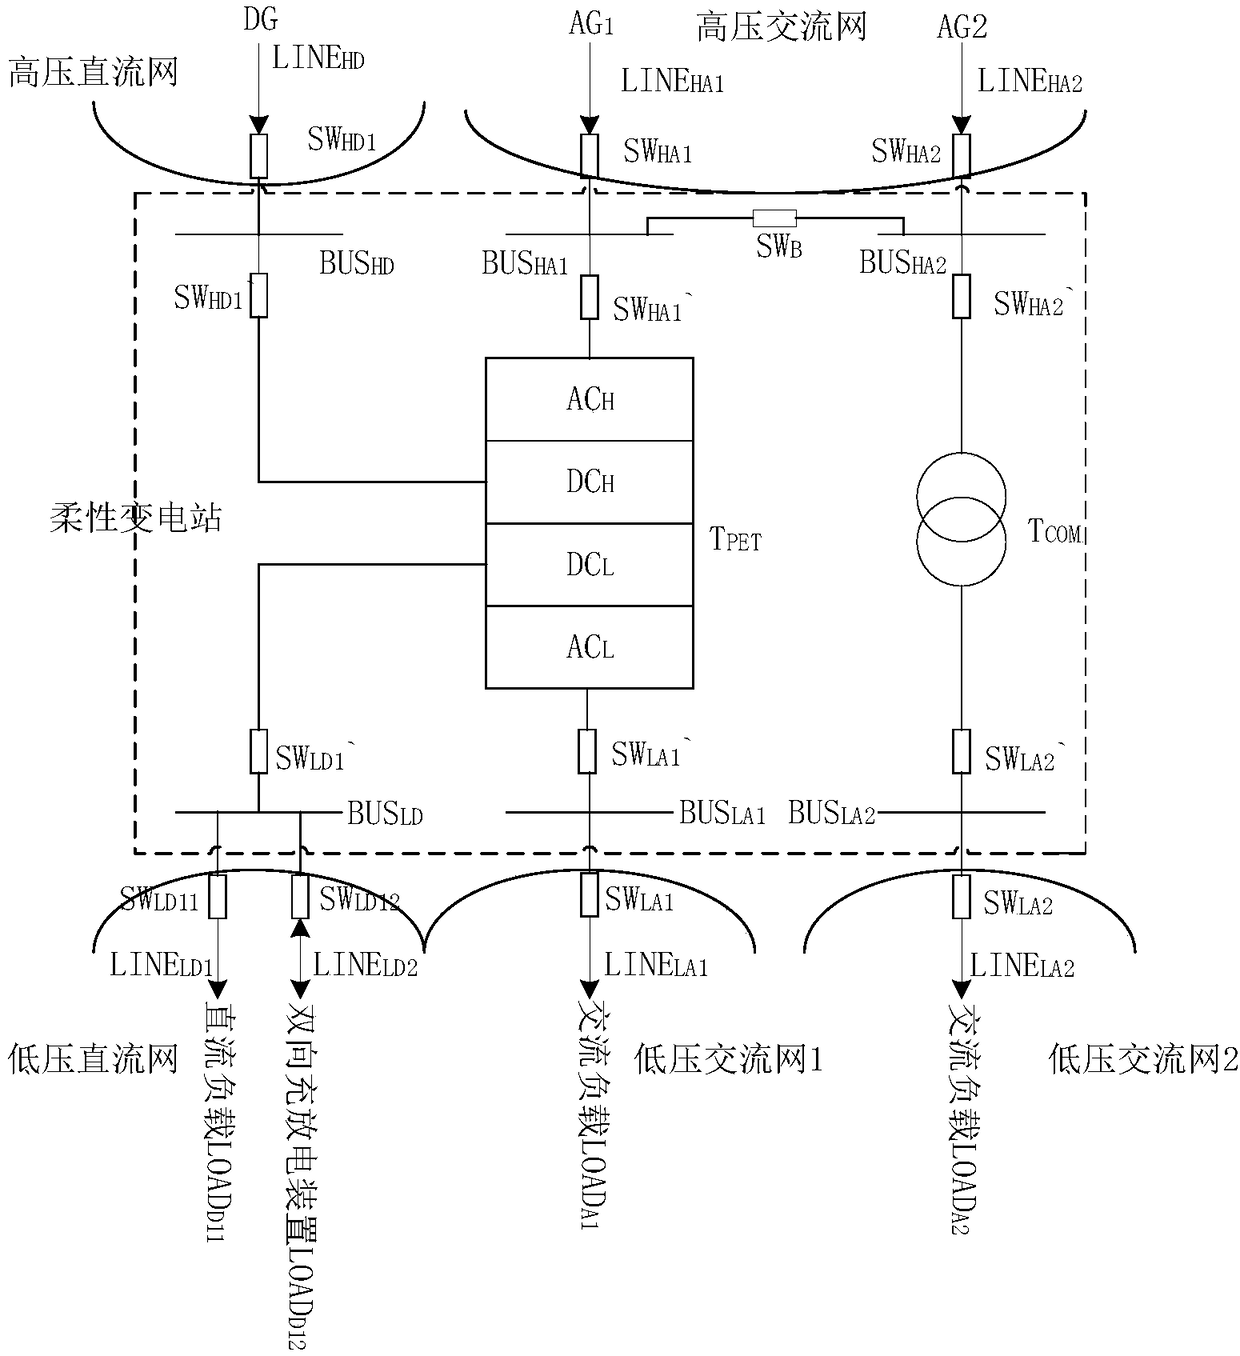 Reliability evaluation method for hybrid alternating current and direct current power distribution network containing flexible transformer substation